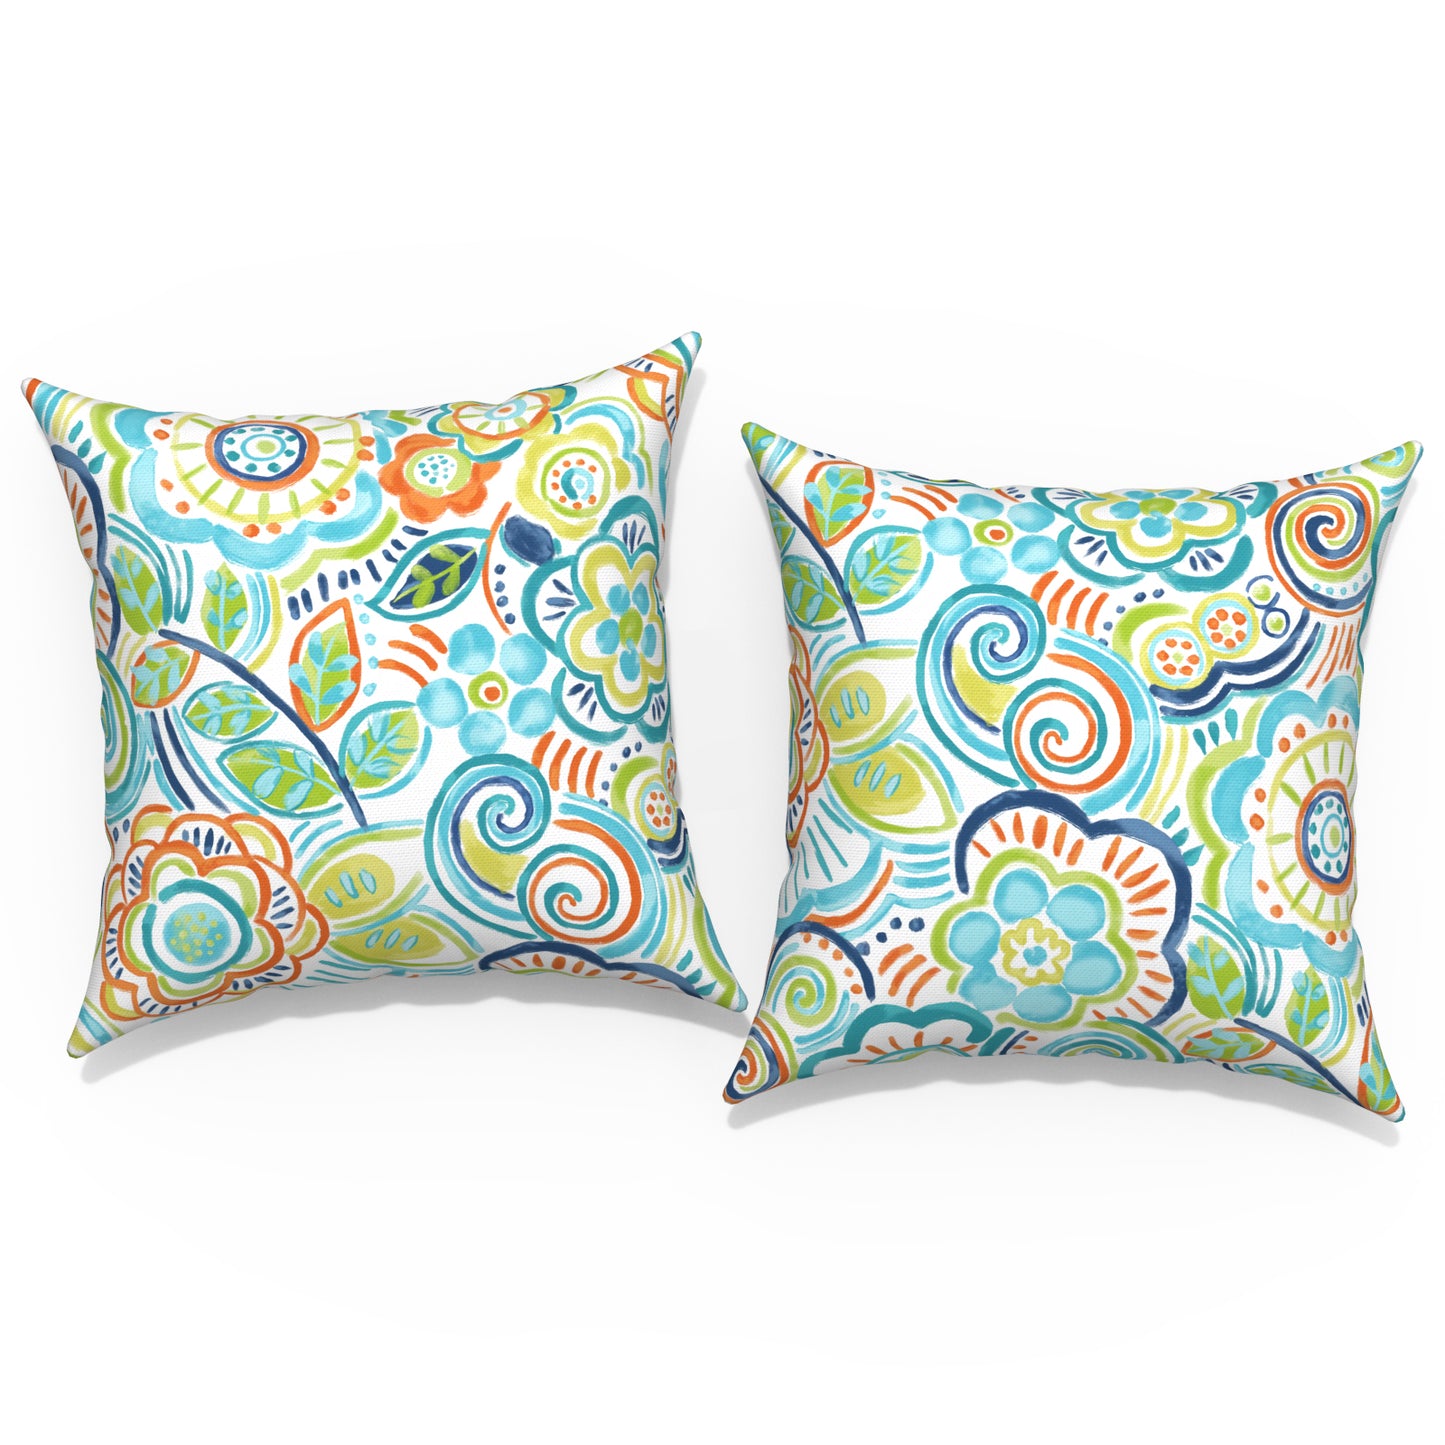 Melody Elephant Outdoor/Indoor Throw Pillow Covers Set of 2, All Weather Square Pillow Cases 16x16 Inch, Patio Cushion Pillow of Home Furniture Use, Flower Blue